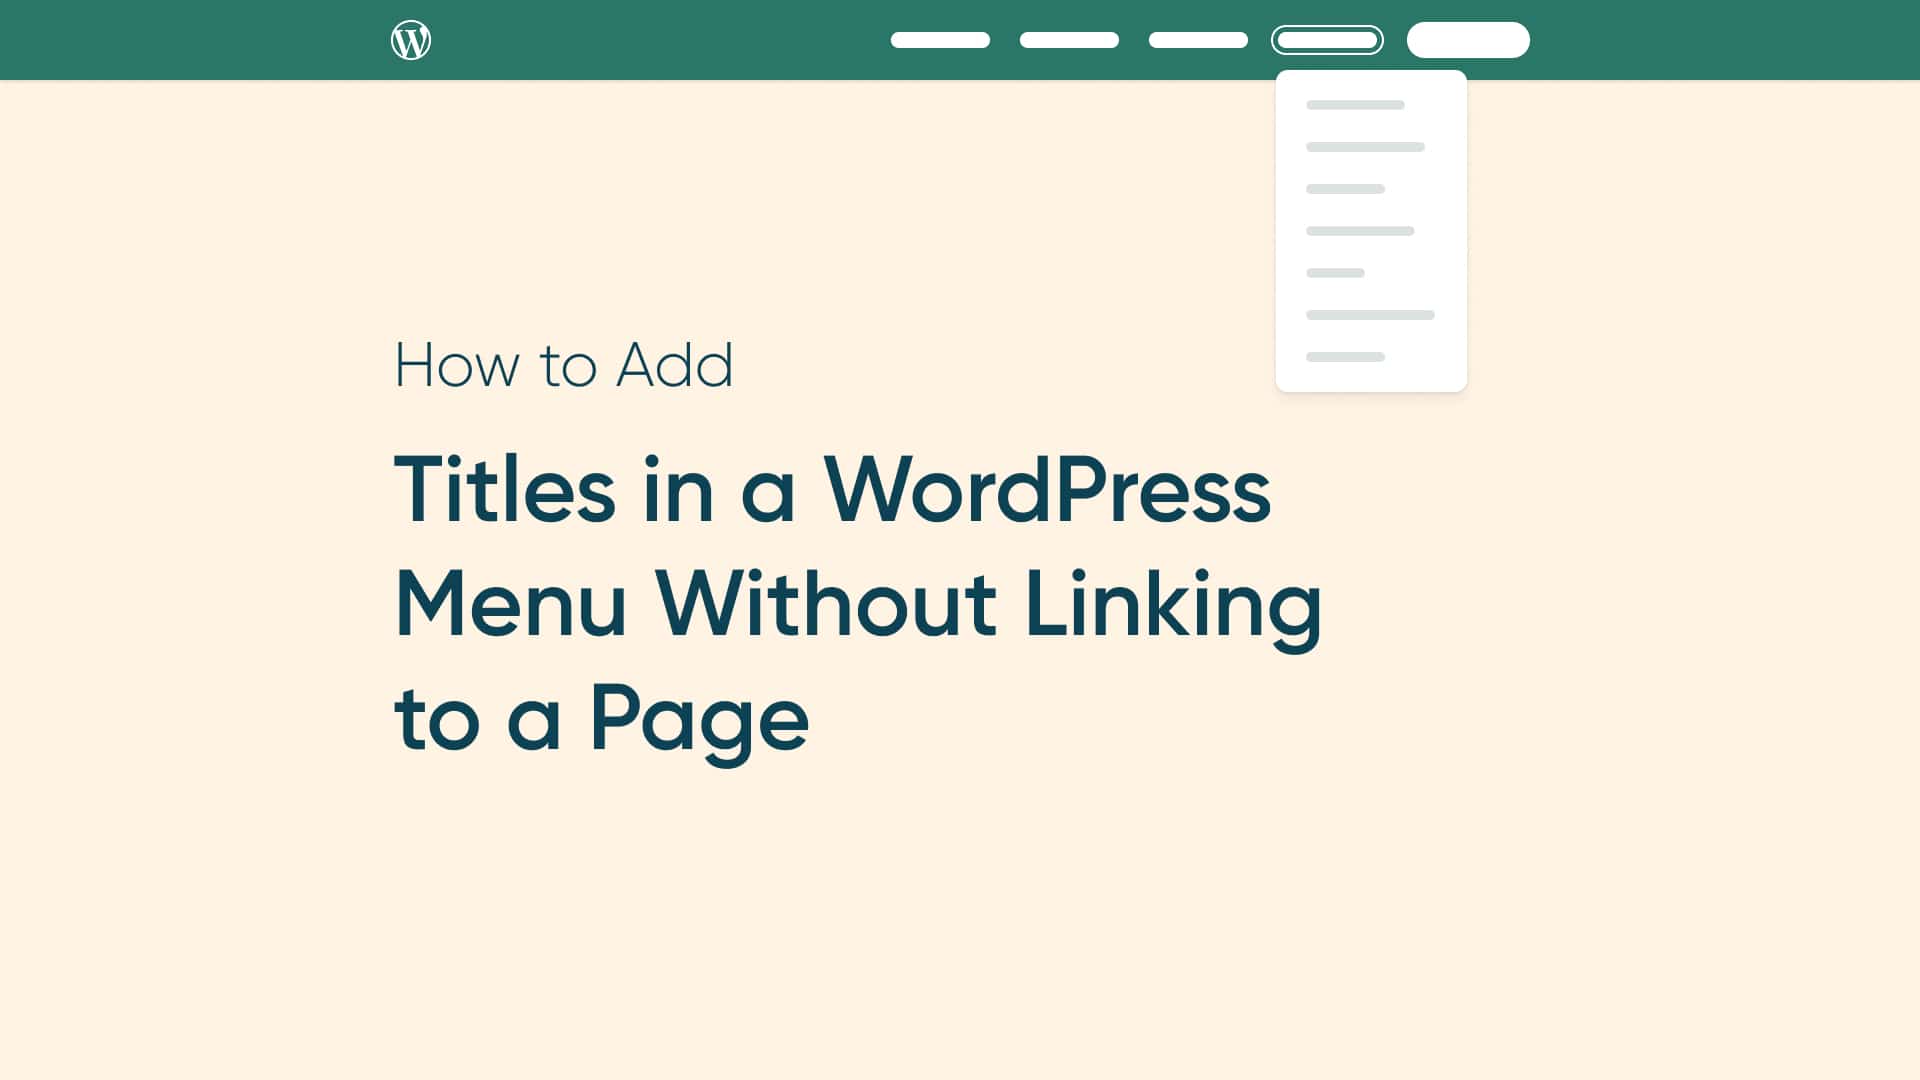 How to Add Titles in a WordPress Menu without Linking to a Page